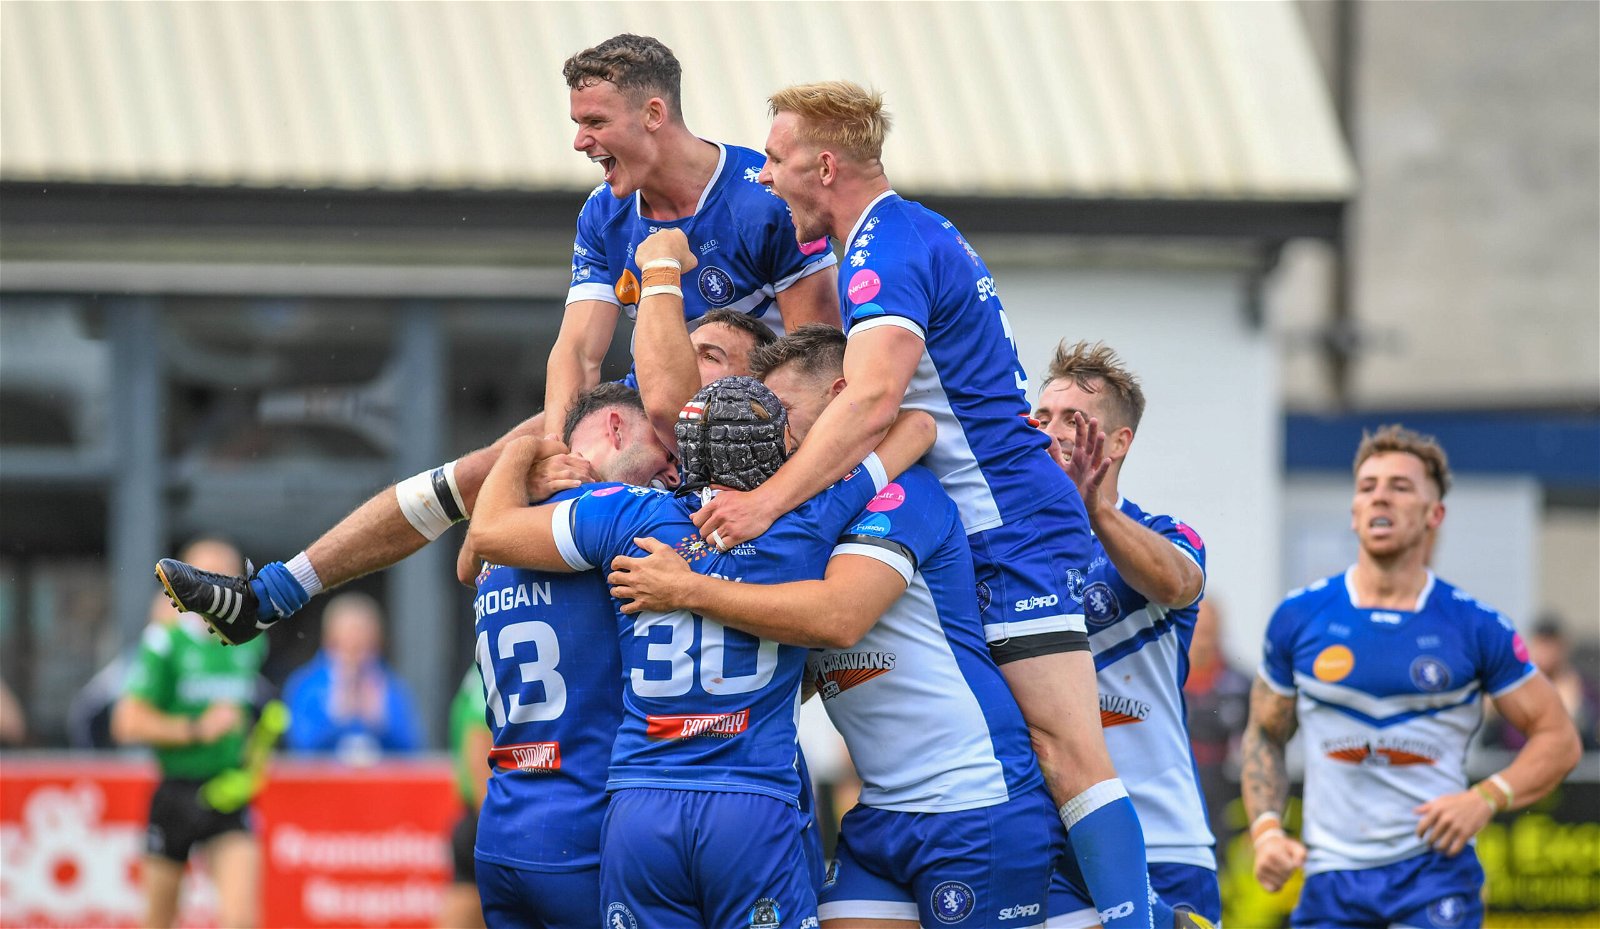 Swinton Lions players celebrate scoring.They have just signed a hooker on loan from Warrington Wolves.